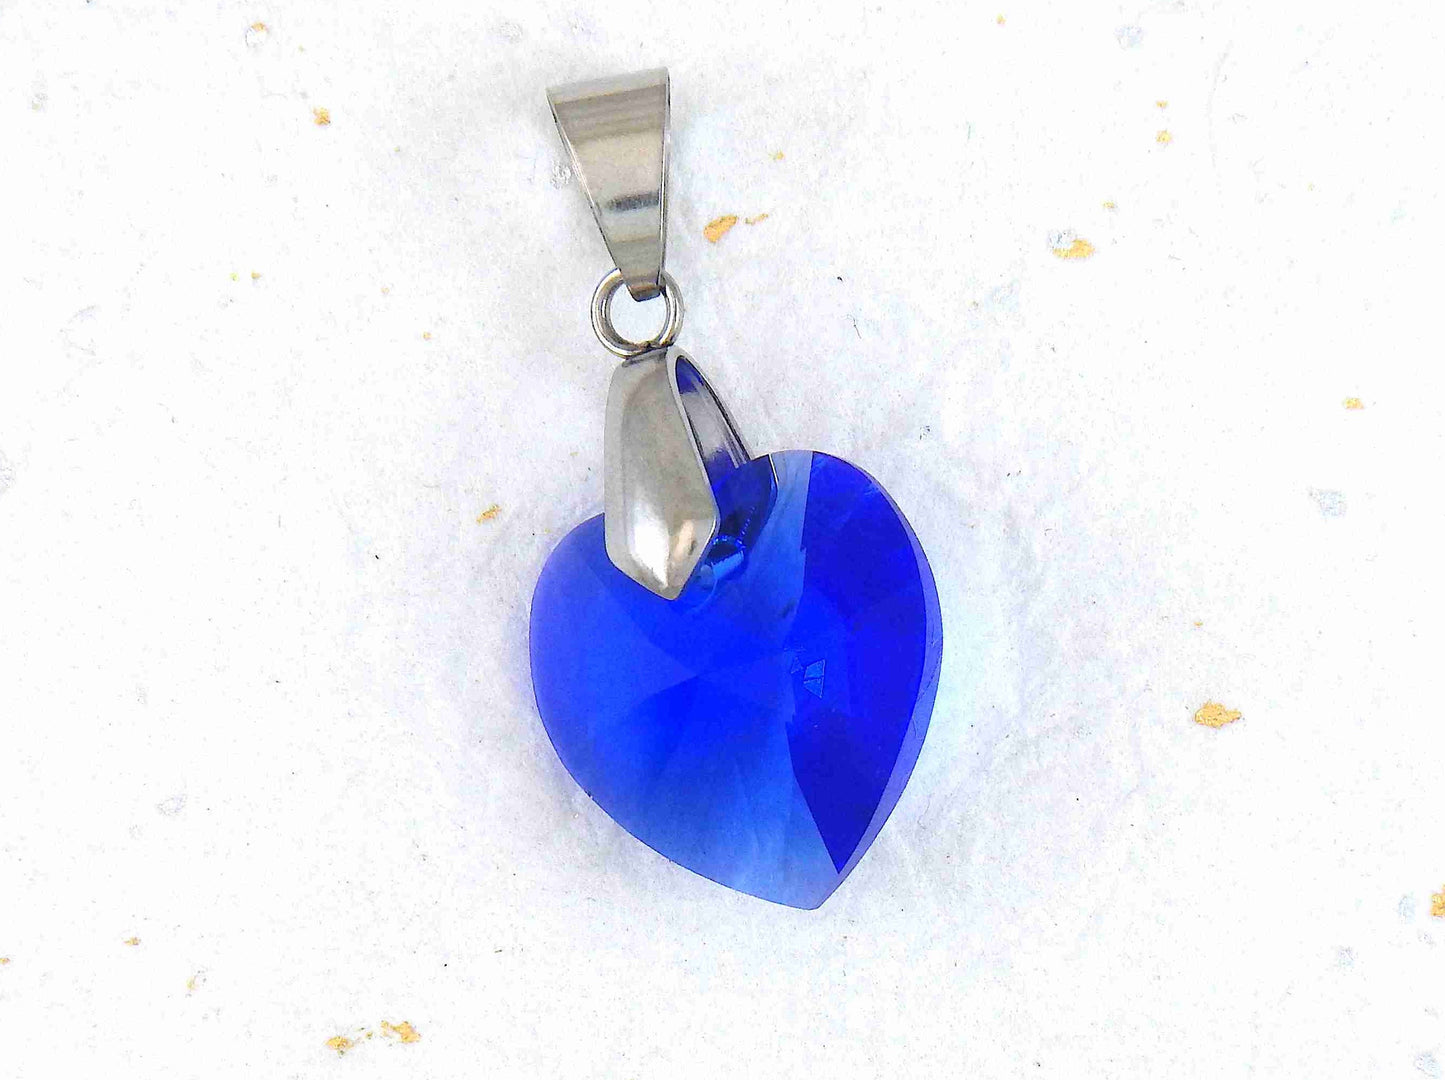 14/16-inch necklace with 18mm Majestic Blue faceted Swarovski crystal heart pendant, stainless steel chain